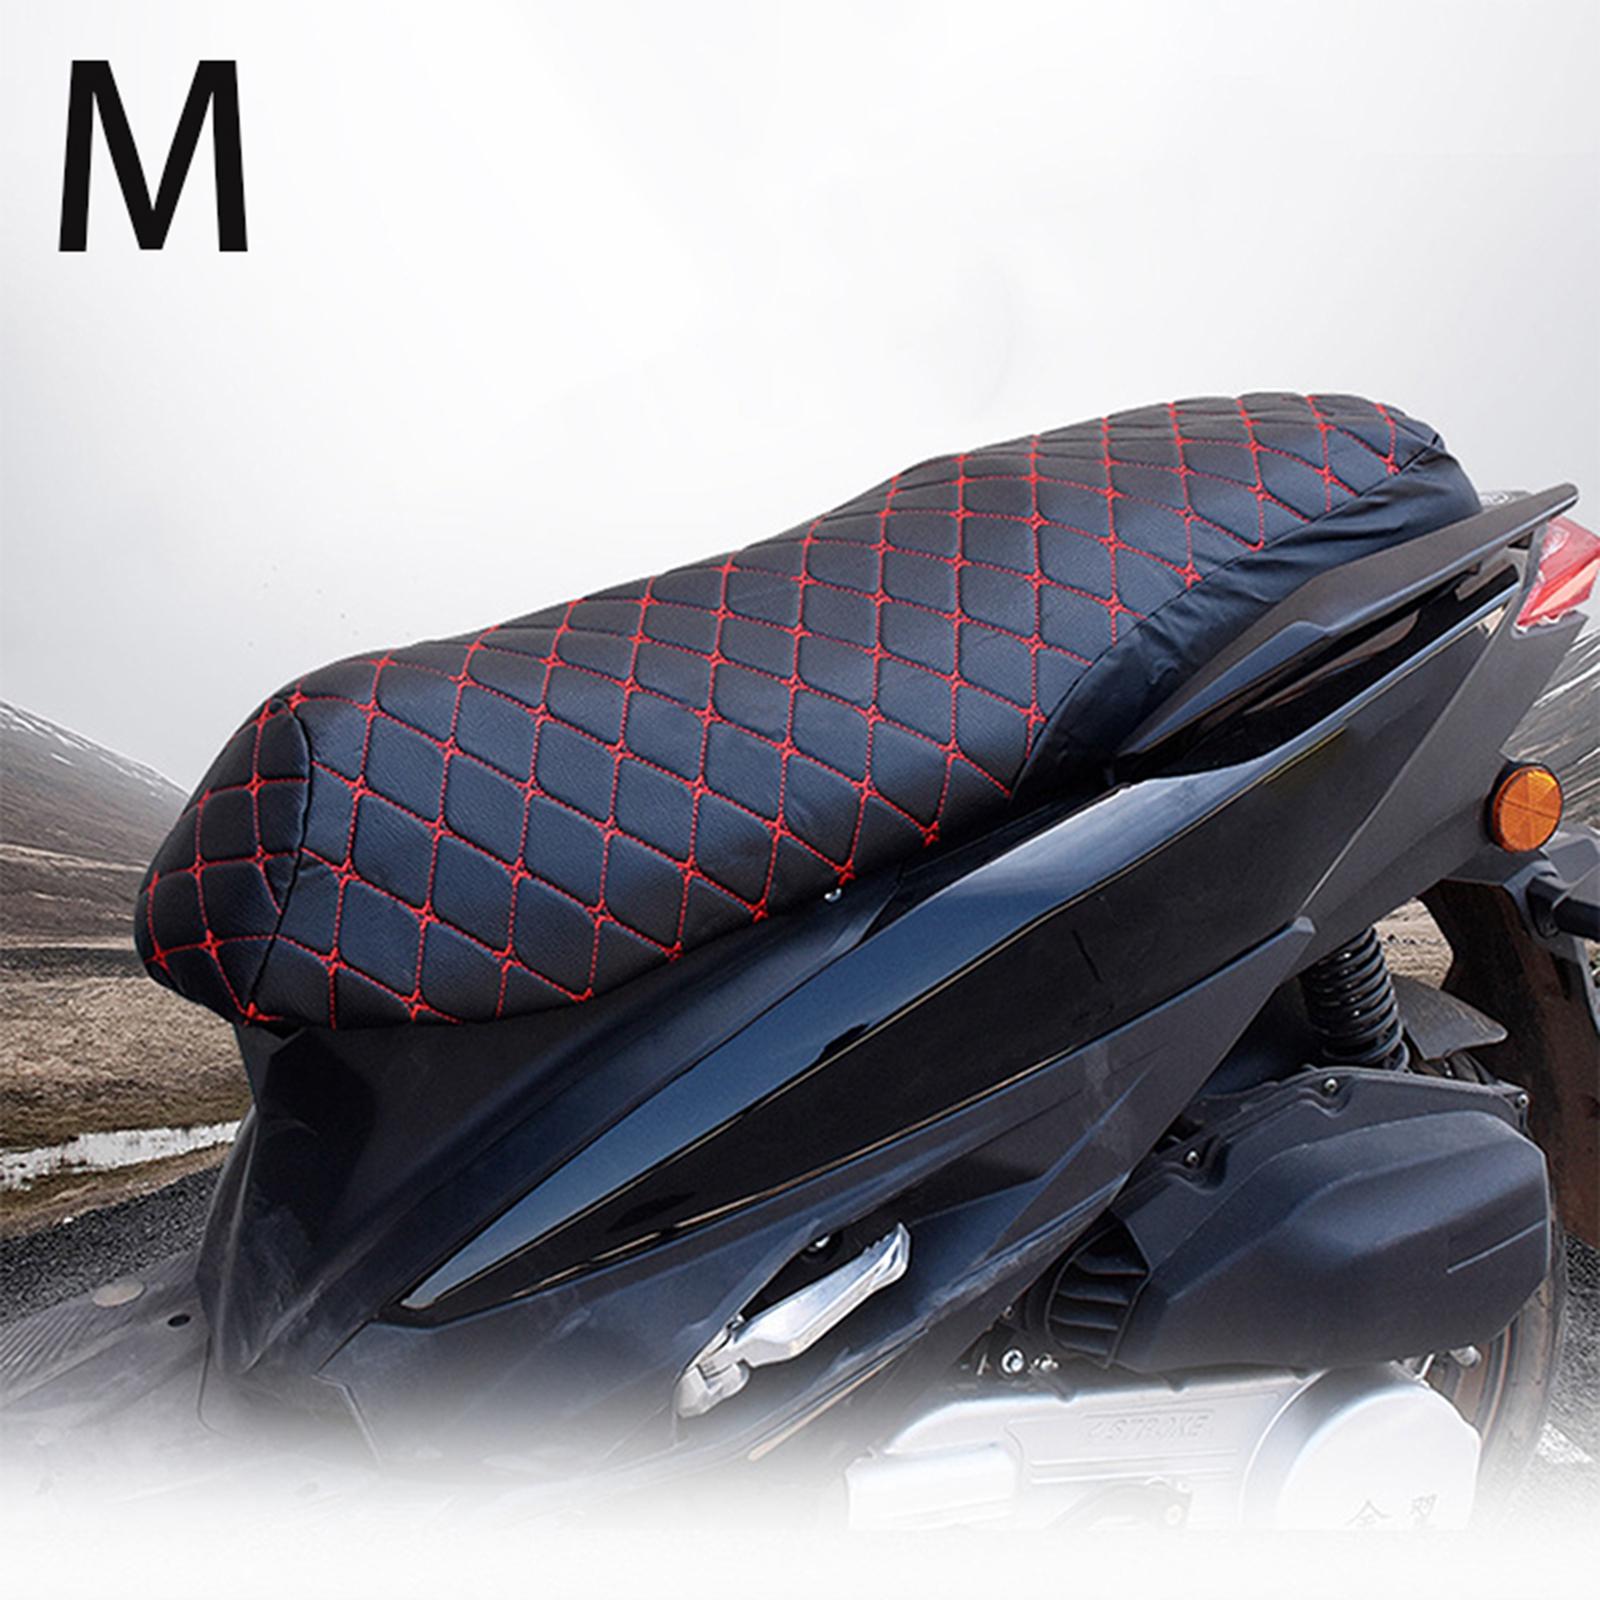 2022 Hot Sale Motorcycle Seat Motorcycle Sunscreen Cushion Cover 3D Shock  Absorption Gel Decompression Riding Motorcycle Seat Cushion